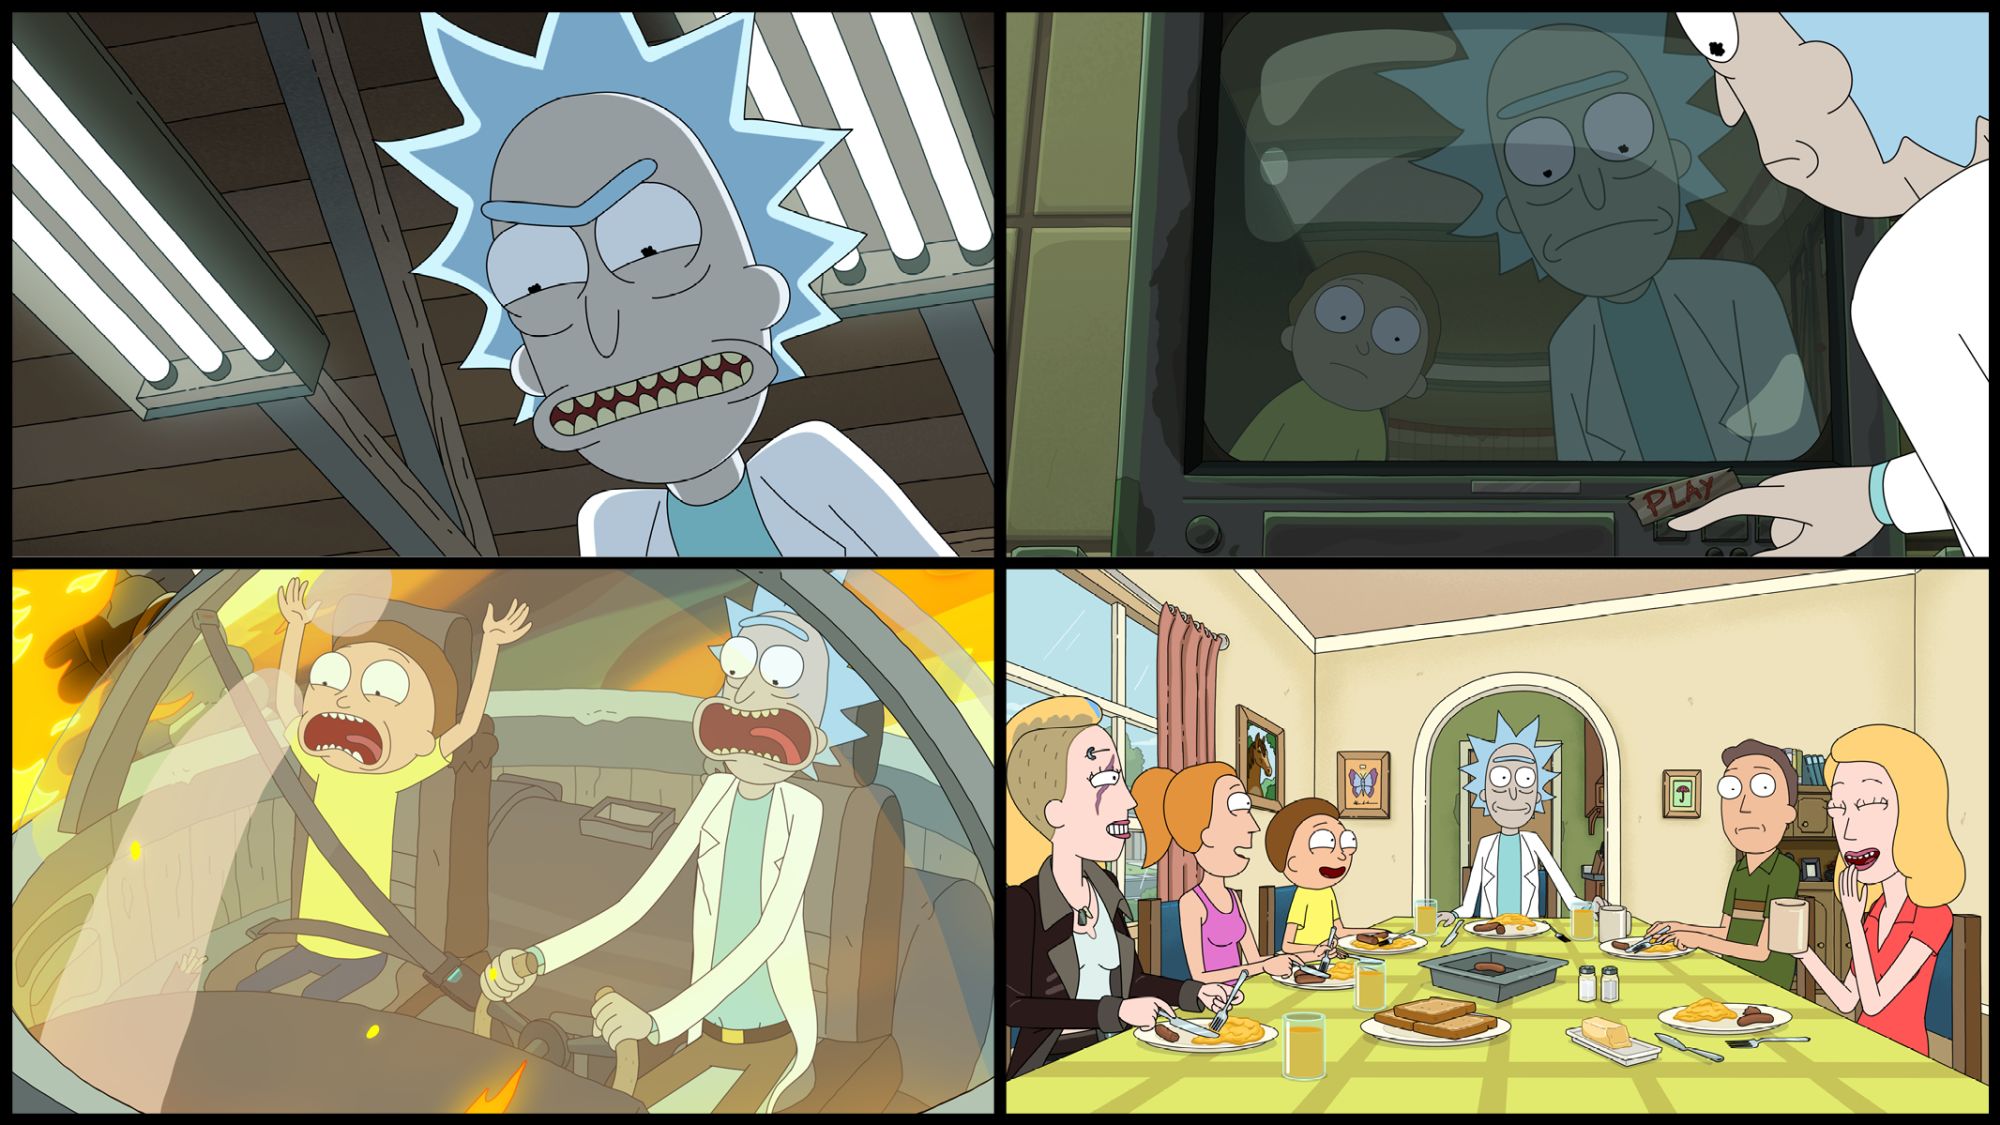 "Rick and Morty" made its title characters face their biggest fears, consider their mortality and finally grow up in its seventh season.